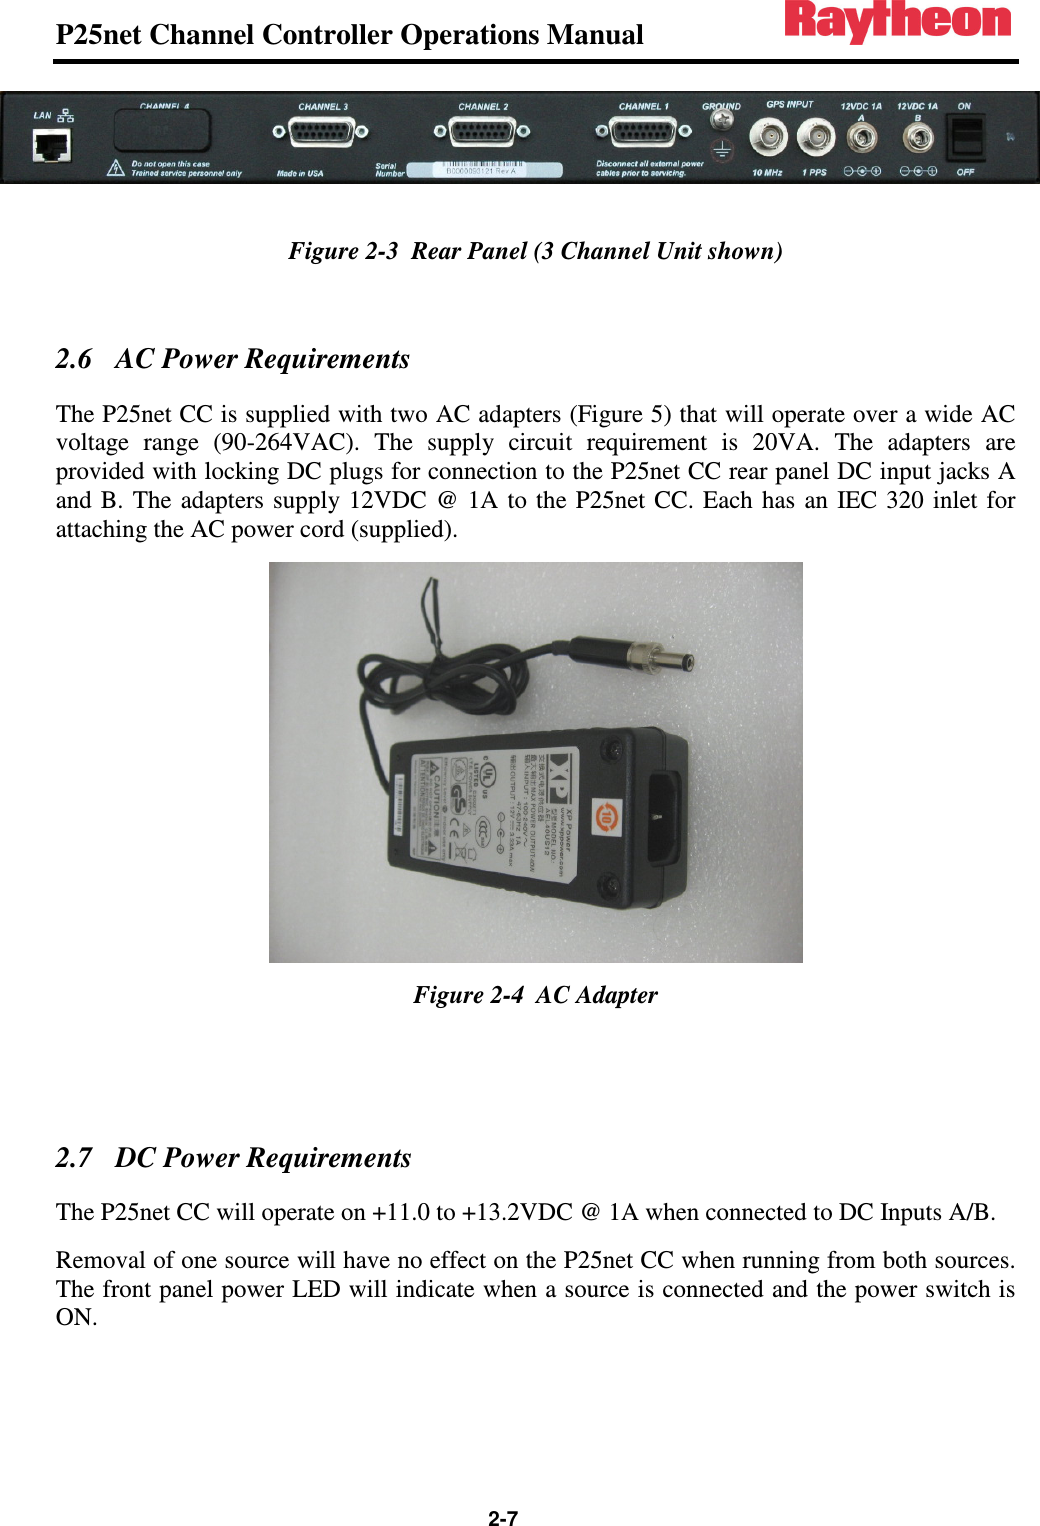 P25net Channel Controller Operations Manual                                                                                                   2-7  Figure 2-3  Rear Panel (3 Channel Unit shown)  2.6 AC Power Requirements The P25net CC is supplied with two AC adapters (Figure 5) that will operate over a wide AC voltage  range  (90-264VAC).  The  supply  circuit  requirement  is  20VA.  The  adapters  are provided with locking DC plugs for connection to the P25net CC rear panel DC input jacks A and B.  The  adapters supply 12VDC  @ 1A to  the  P25net  CC. Each  has  an  IEC 320  inlet for attaching the AC power cord (supplied).  Figure 2-4  AC Adapter   2.7 DC Power Requirements The P25net CC will operate on +11.0 to +13.2VDC @ 1A when connected to DC Inputs A/B. Removal of one source will have no effect on the P25net CC when running from both sources. The front panel power LED will indicate when a source is connected and the power switch is ON.  